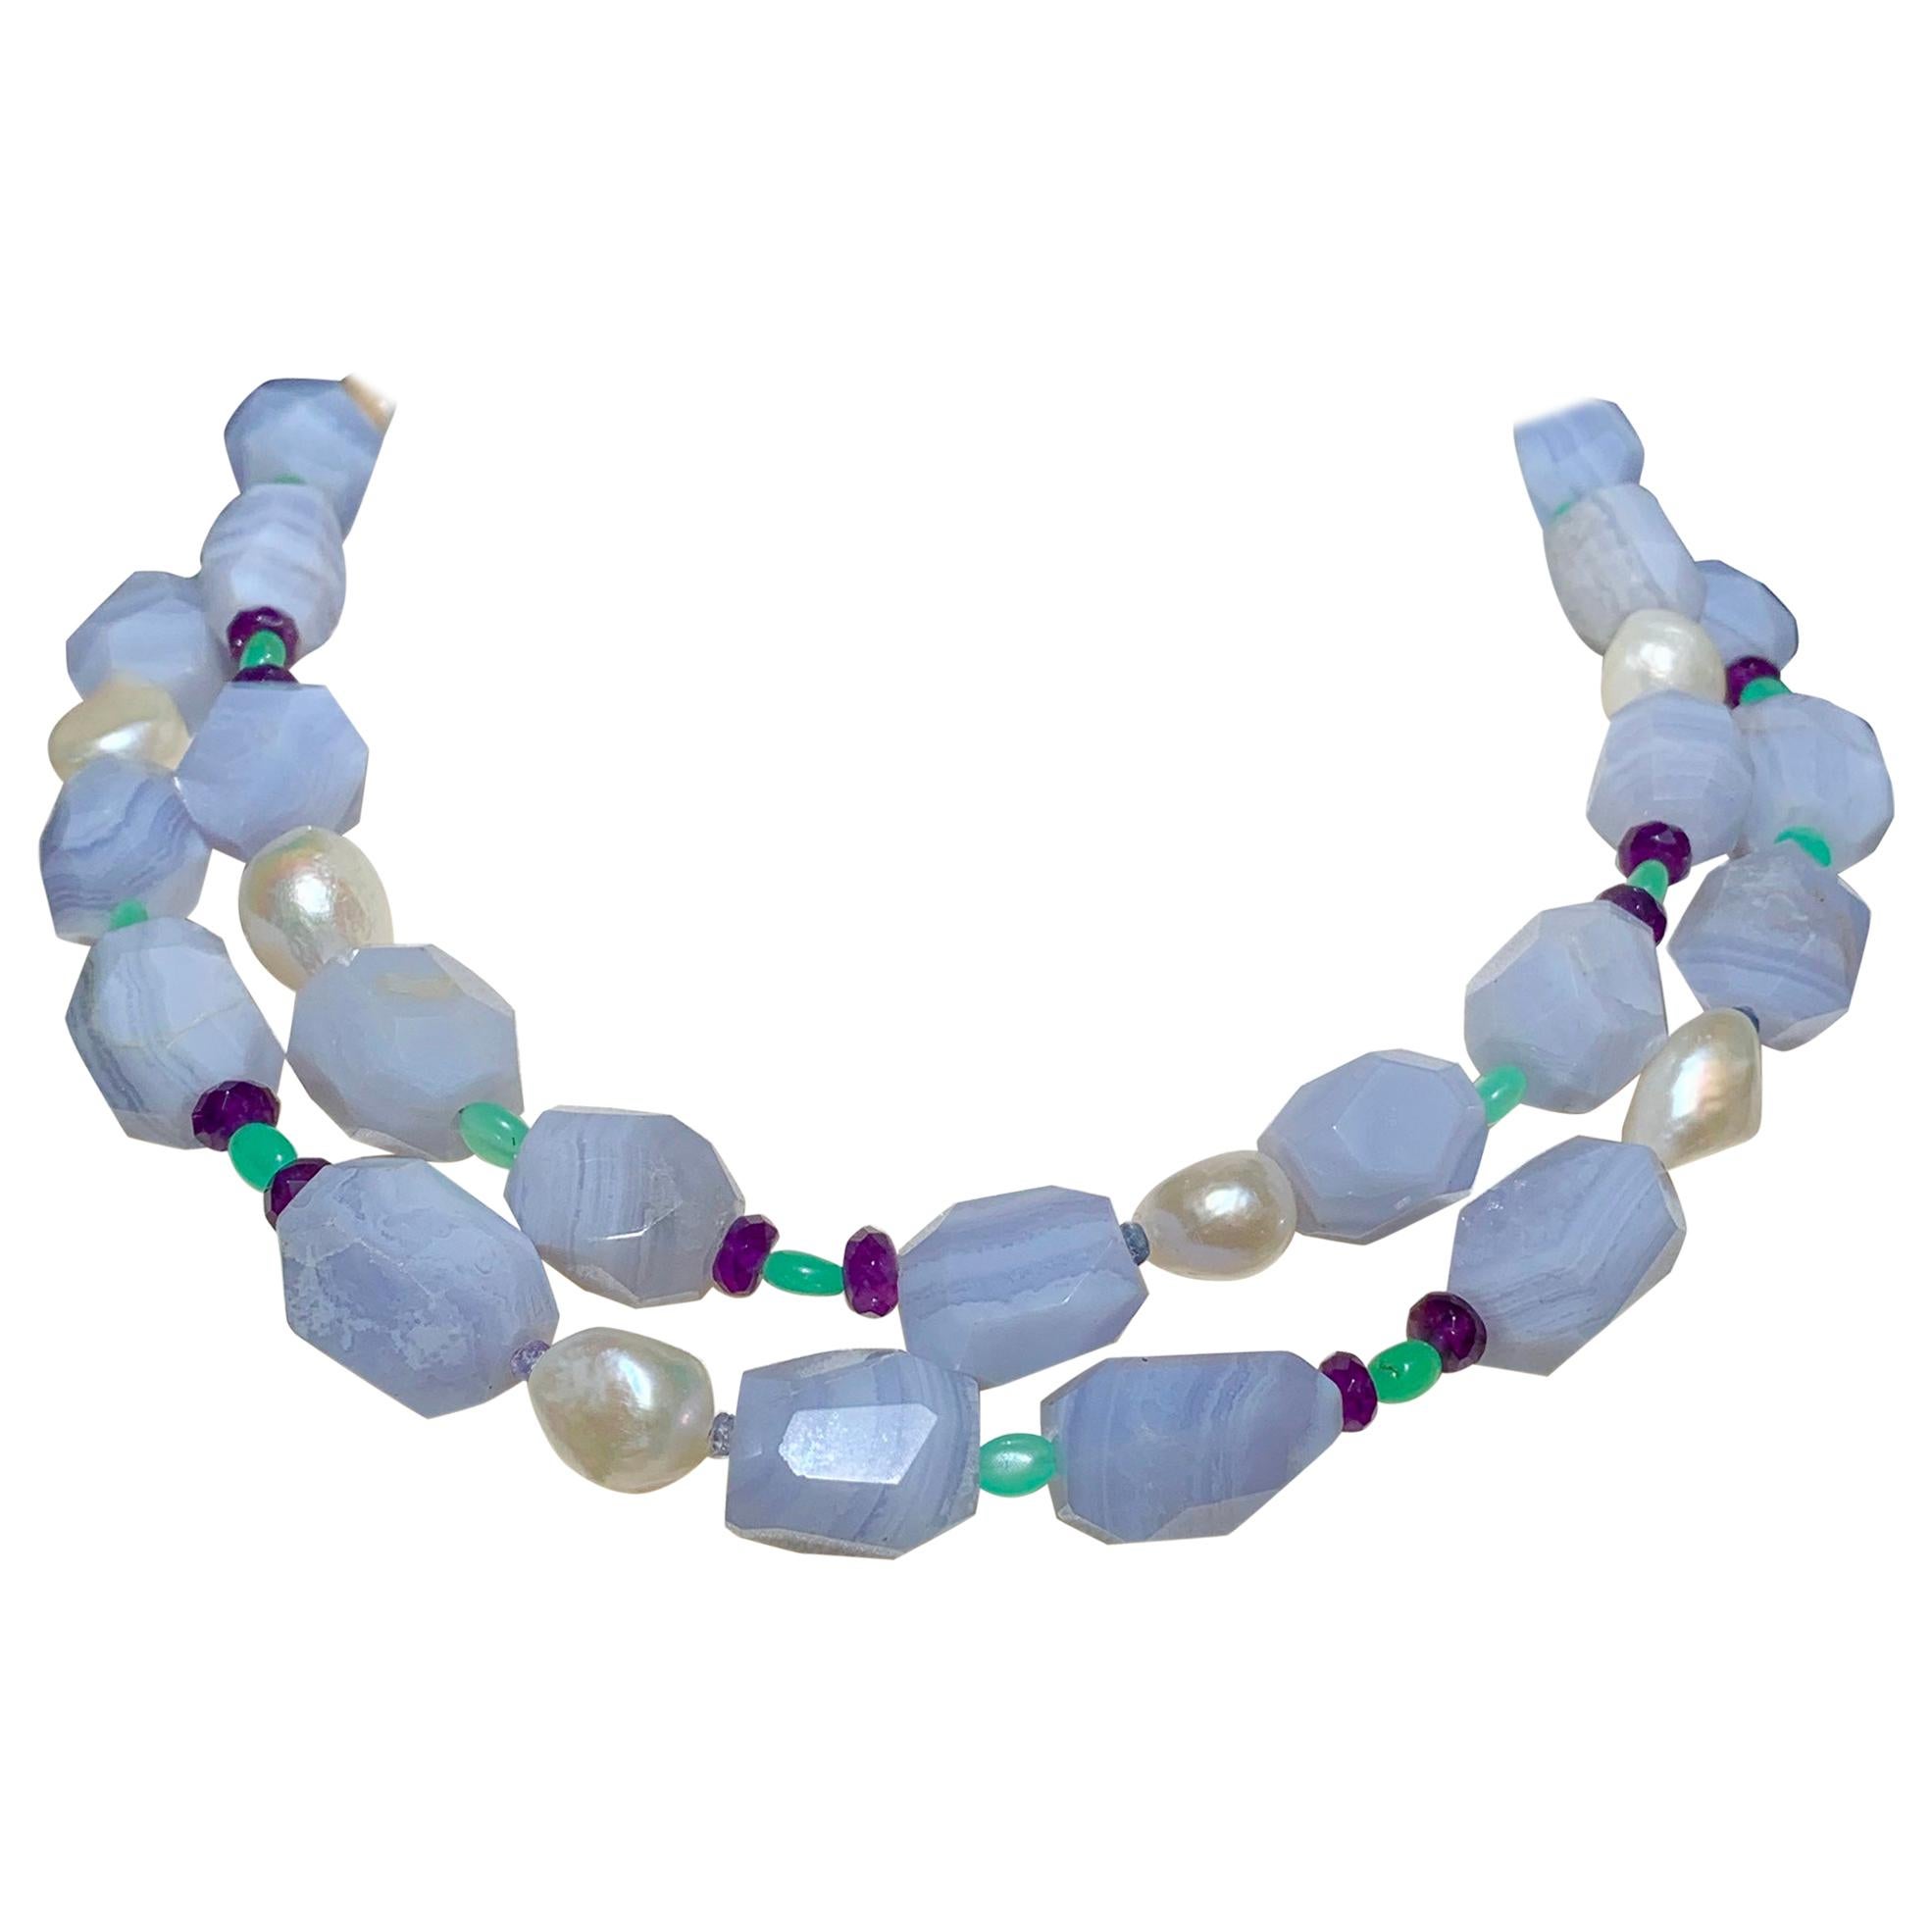  36" Blue Lace Agate Necklace/Blue Chalcedony with Chrysoprase and Amethyst For Sale